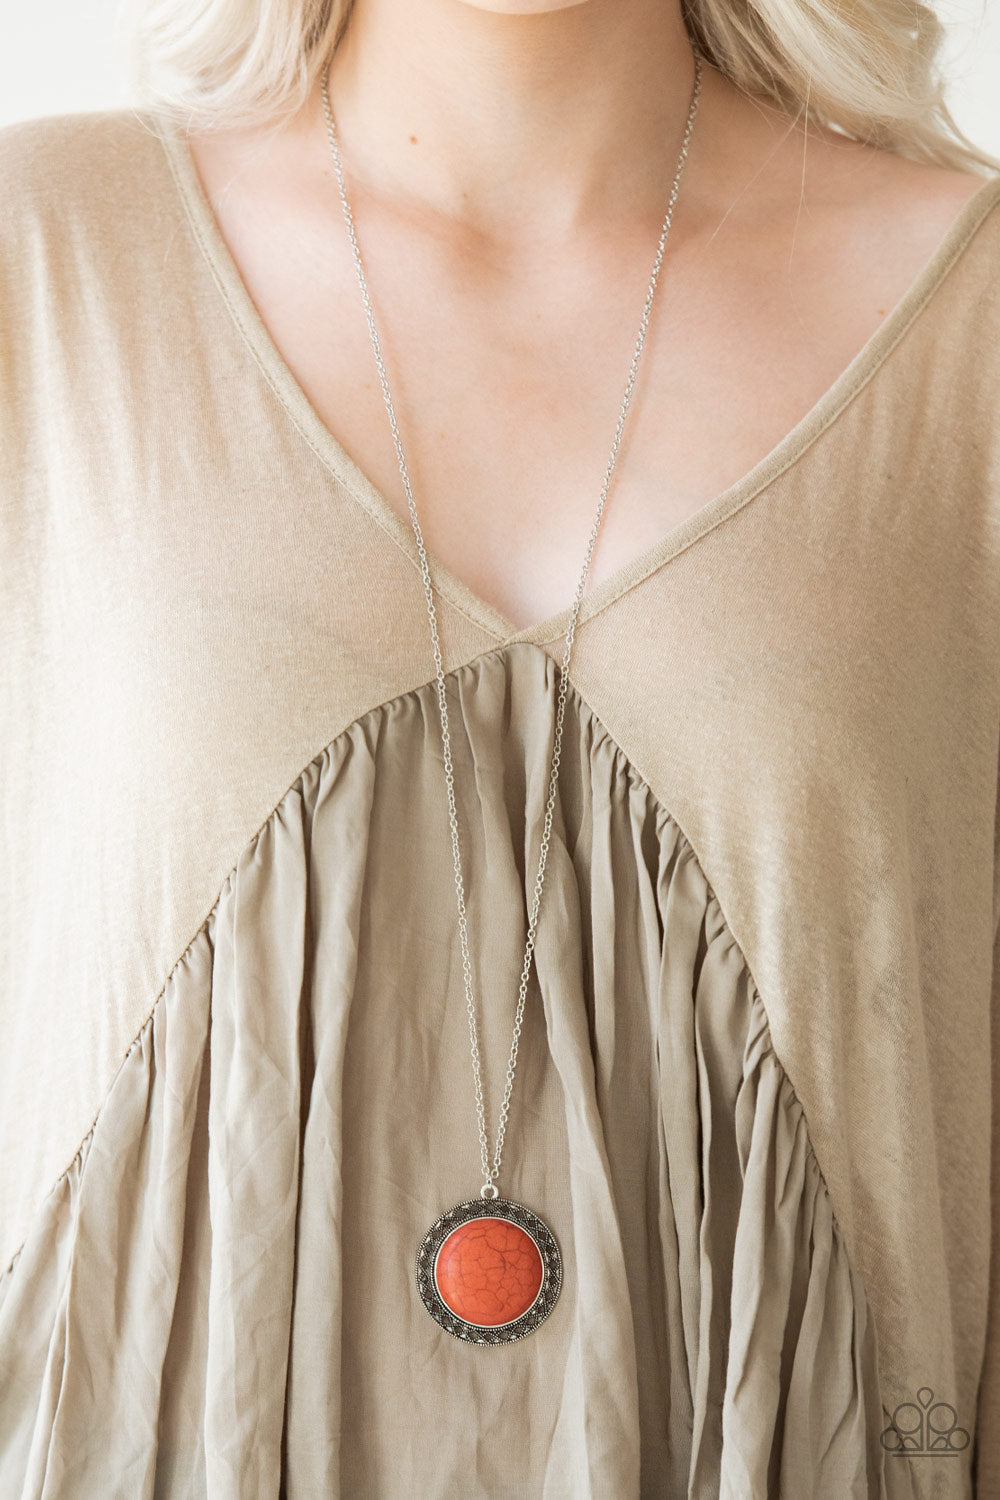 Run Out Of RODEO Orange Necklace Paparazzi Accessories